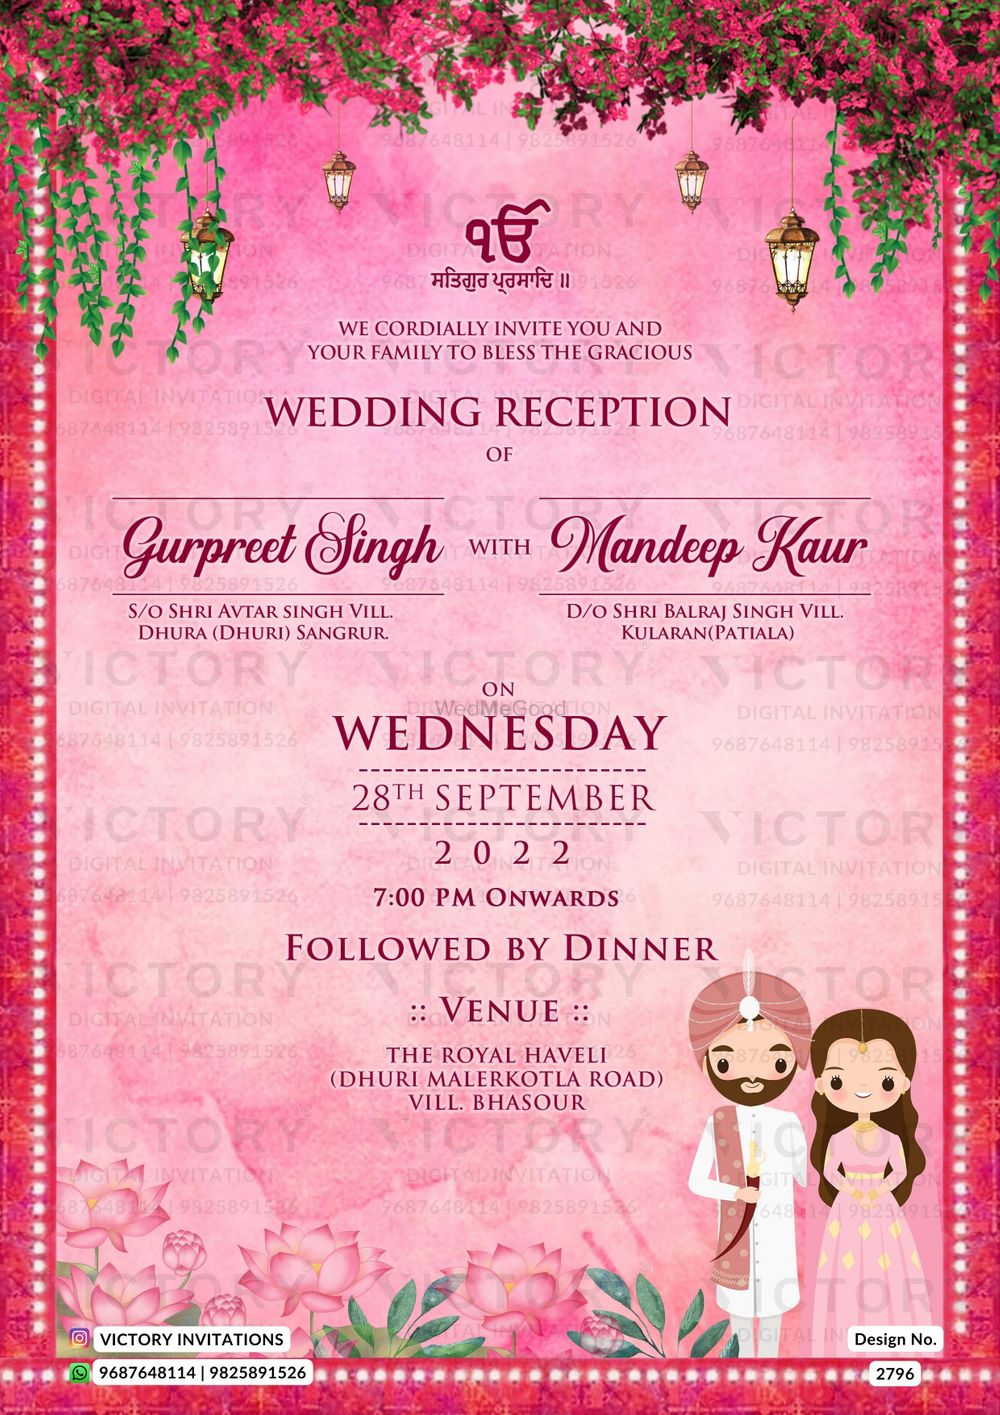 Photo From Punjabi Wedding - By Victory Invitations